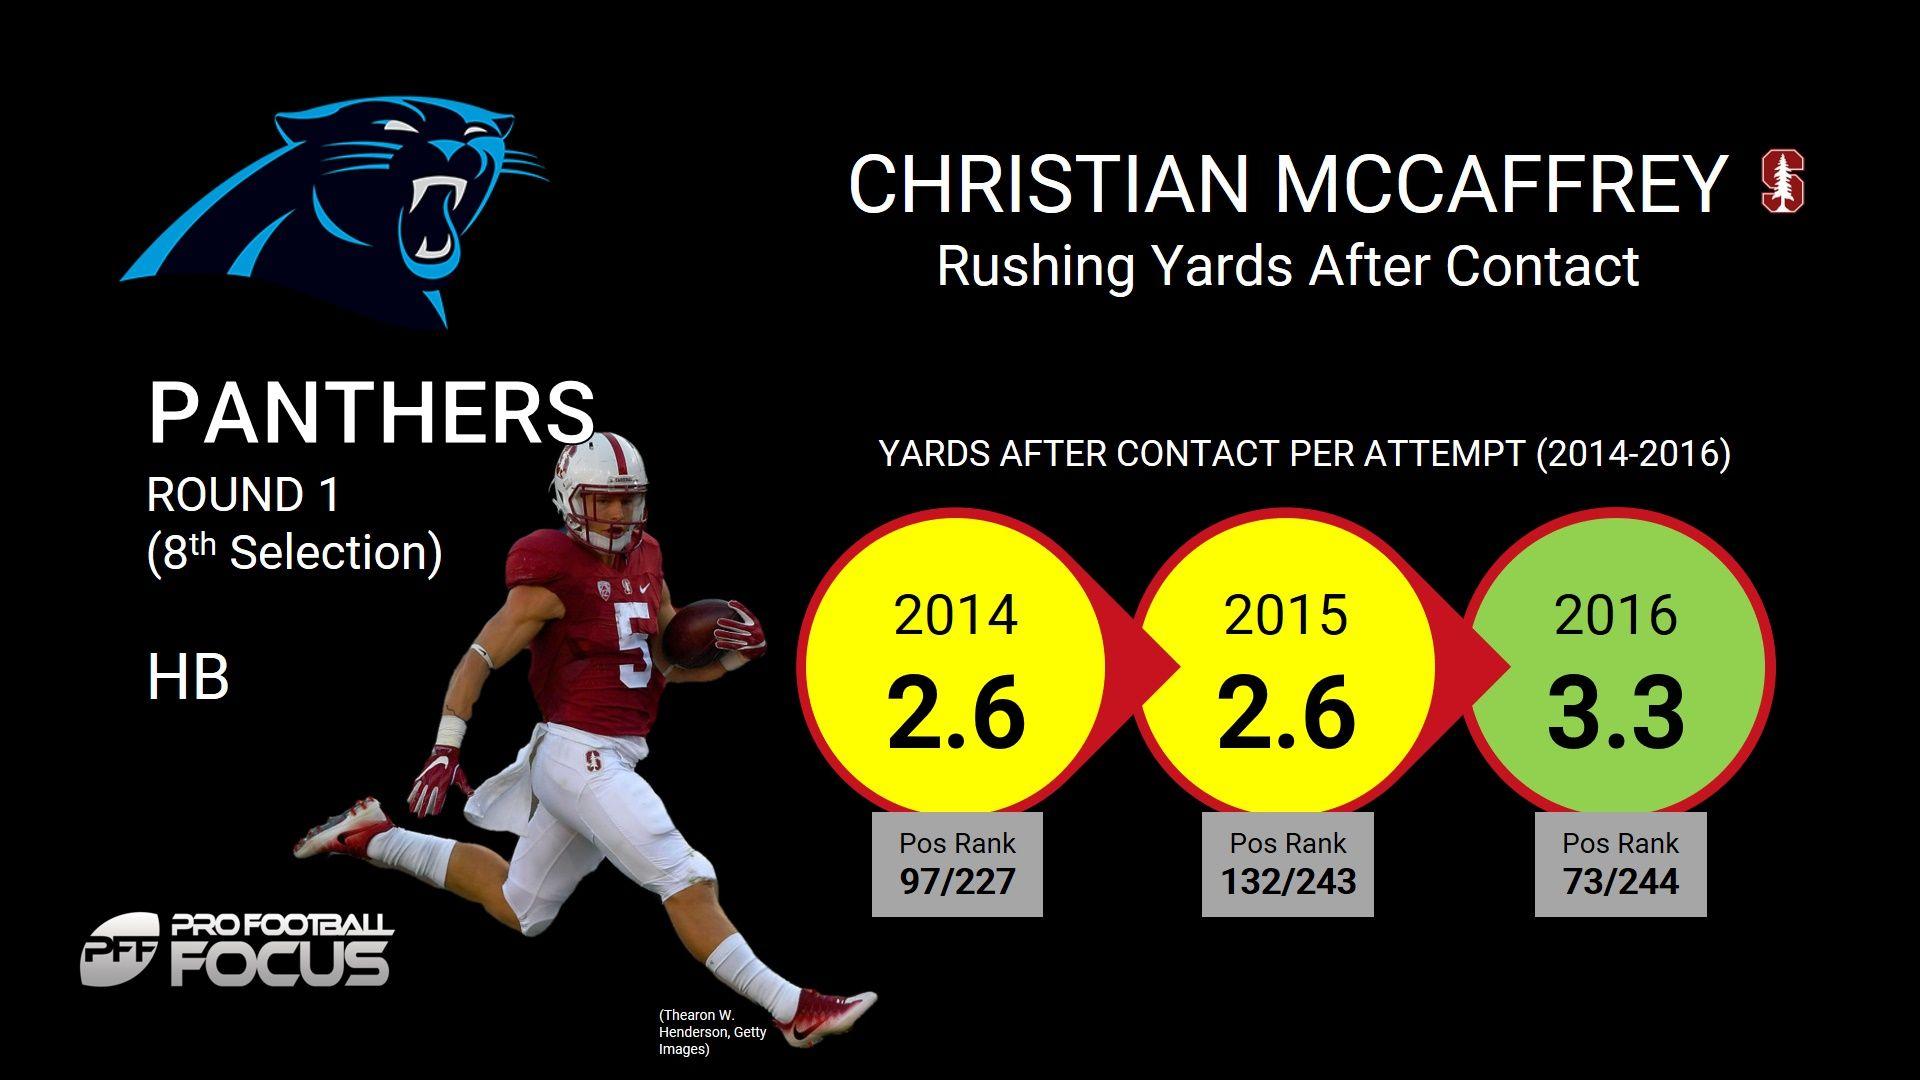 Panthers go RB, take Christian McCaffrey at 8th overall. NFL